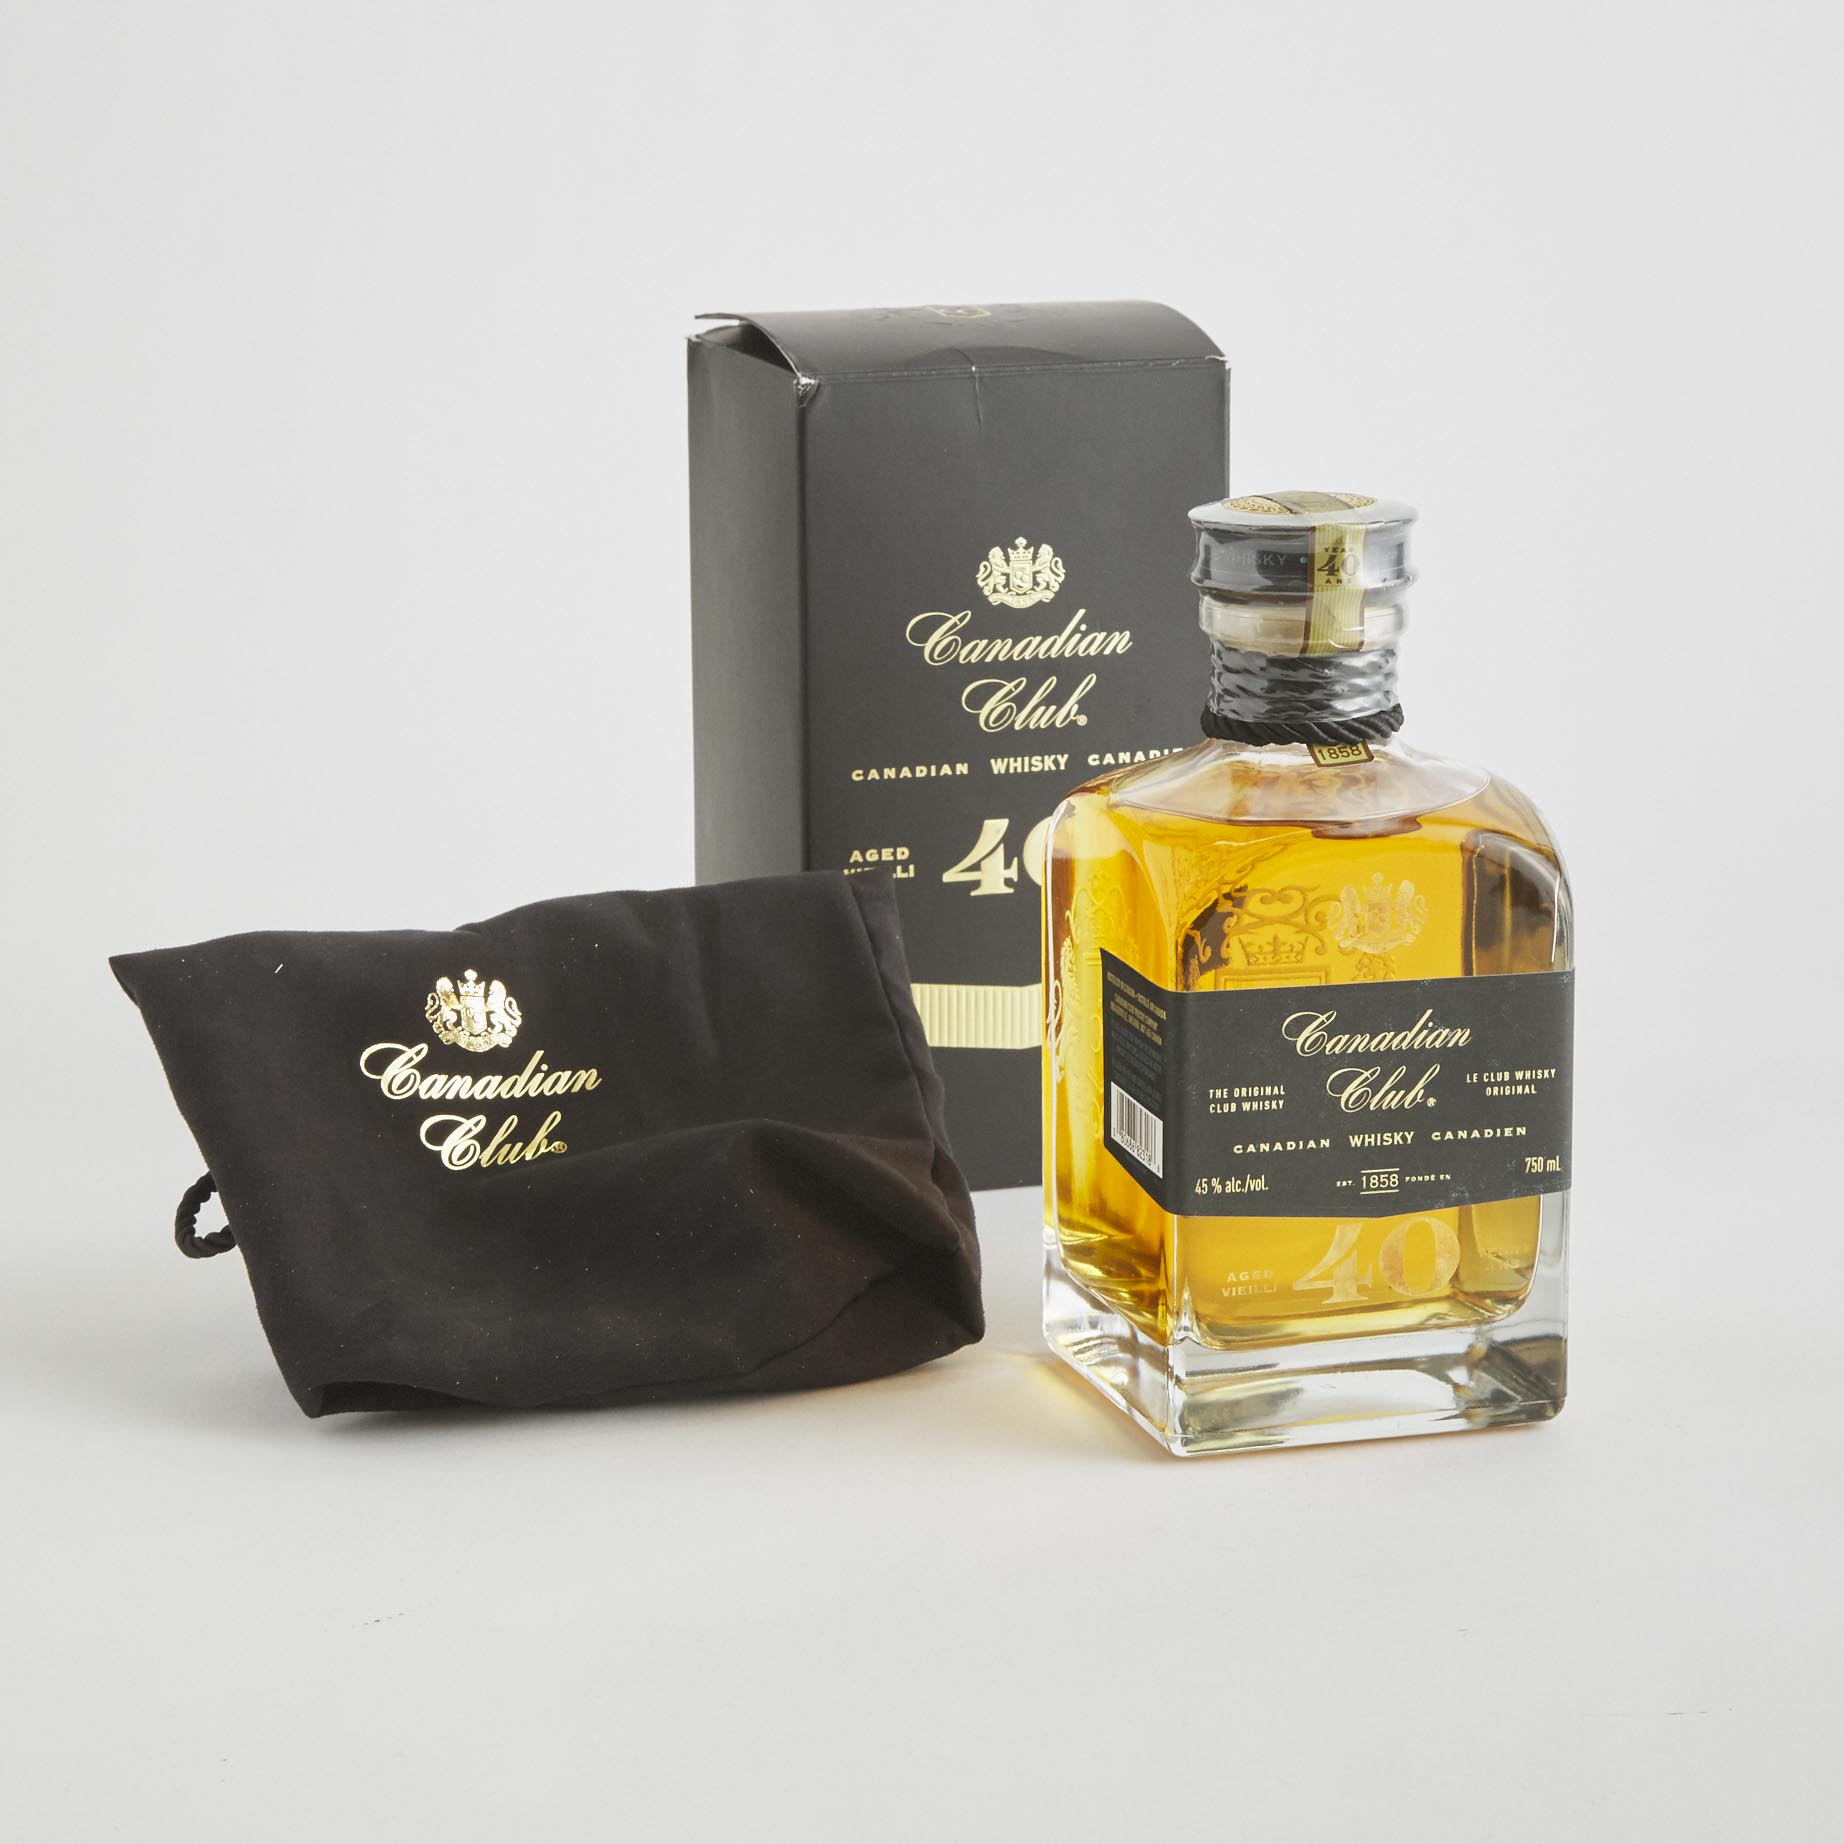 CANADIAN CLUB CANADIAN WHISKY 40 YEARS (ONE 750 ML)